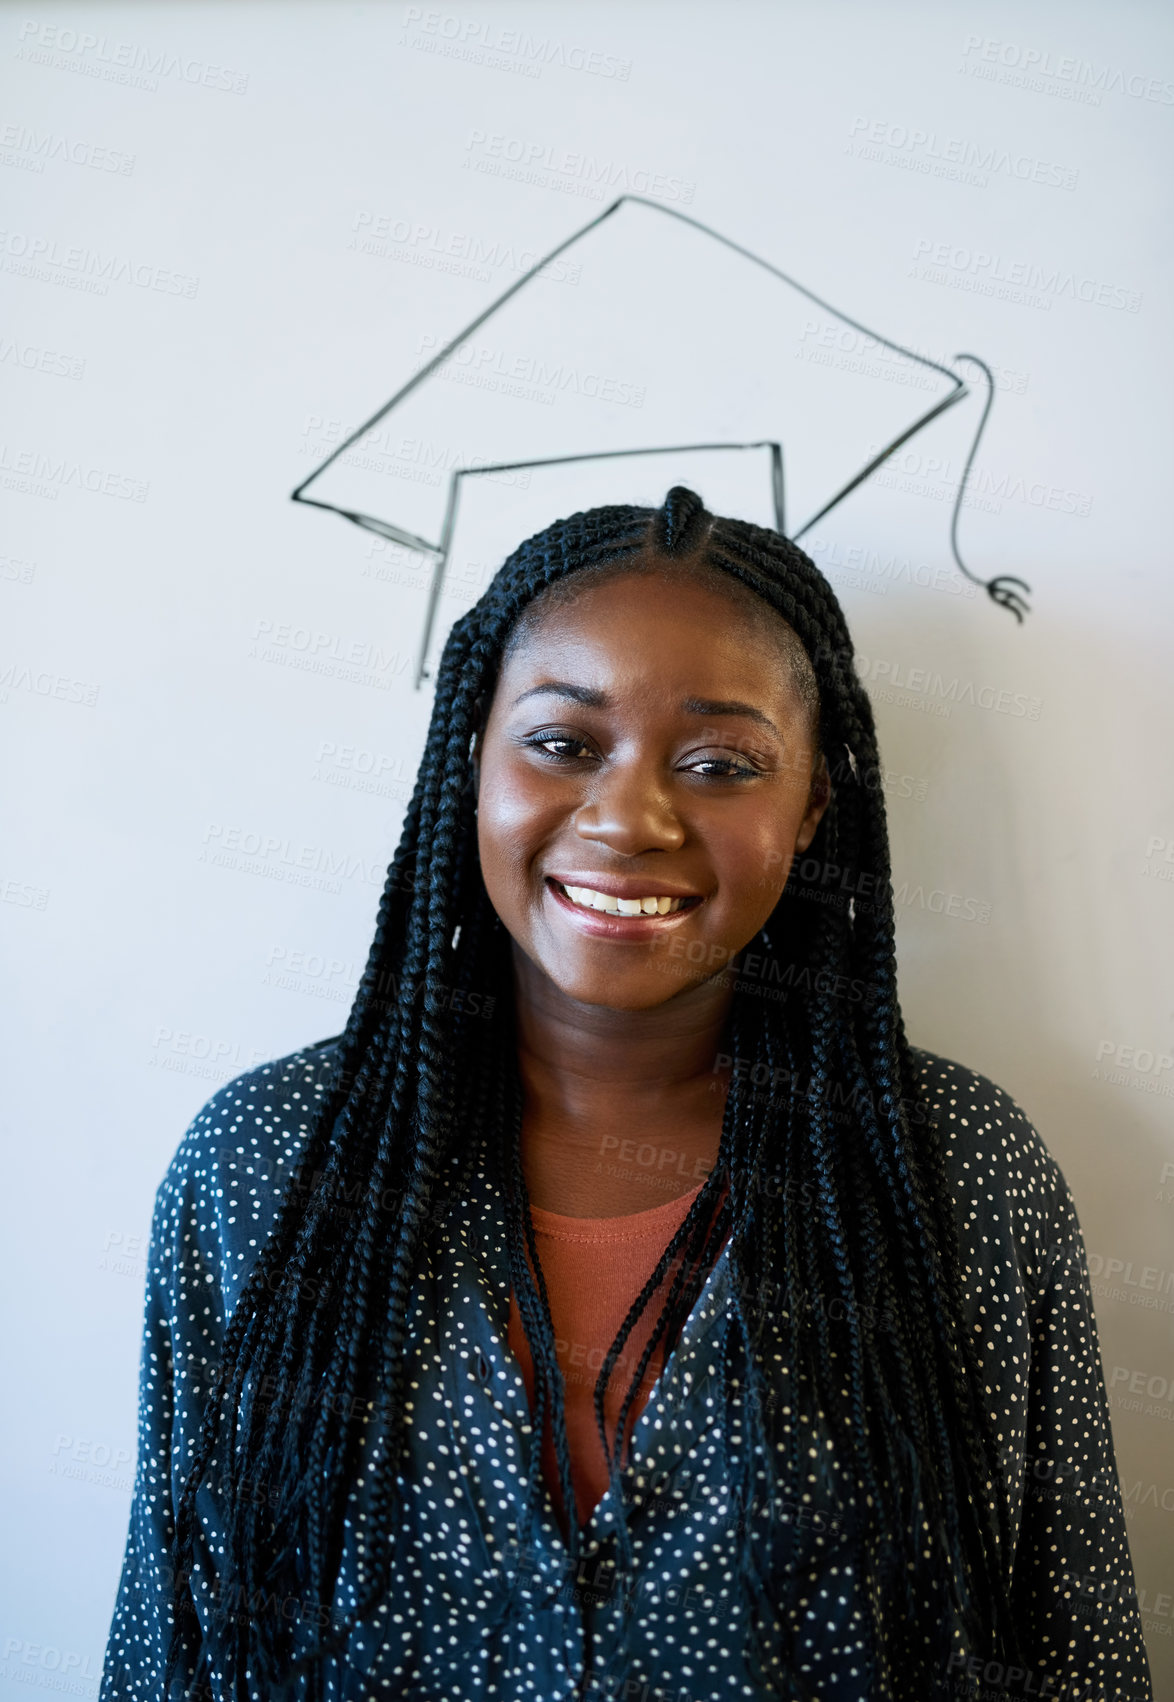 Buy stock photo Cropped portrait of a young university student standing against a whiteboard with a graduation cap drawn on it